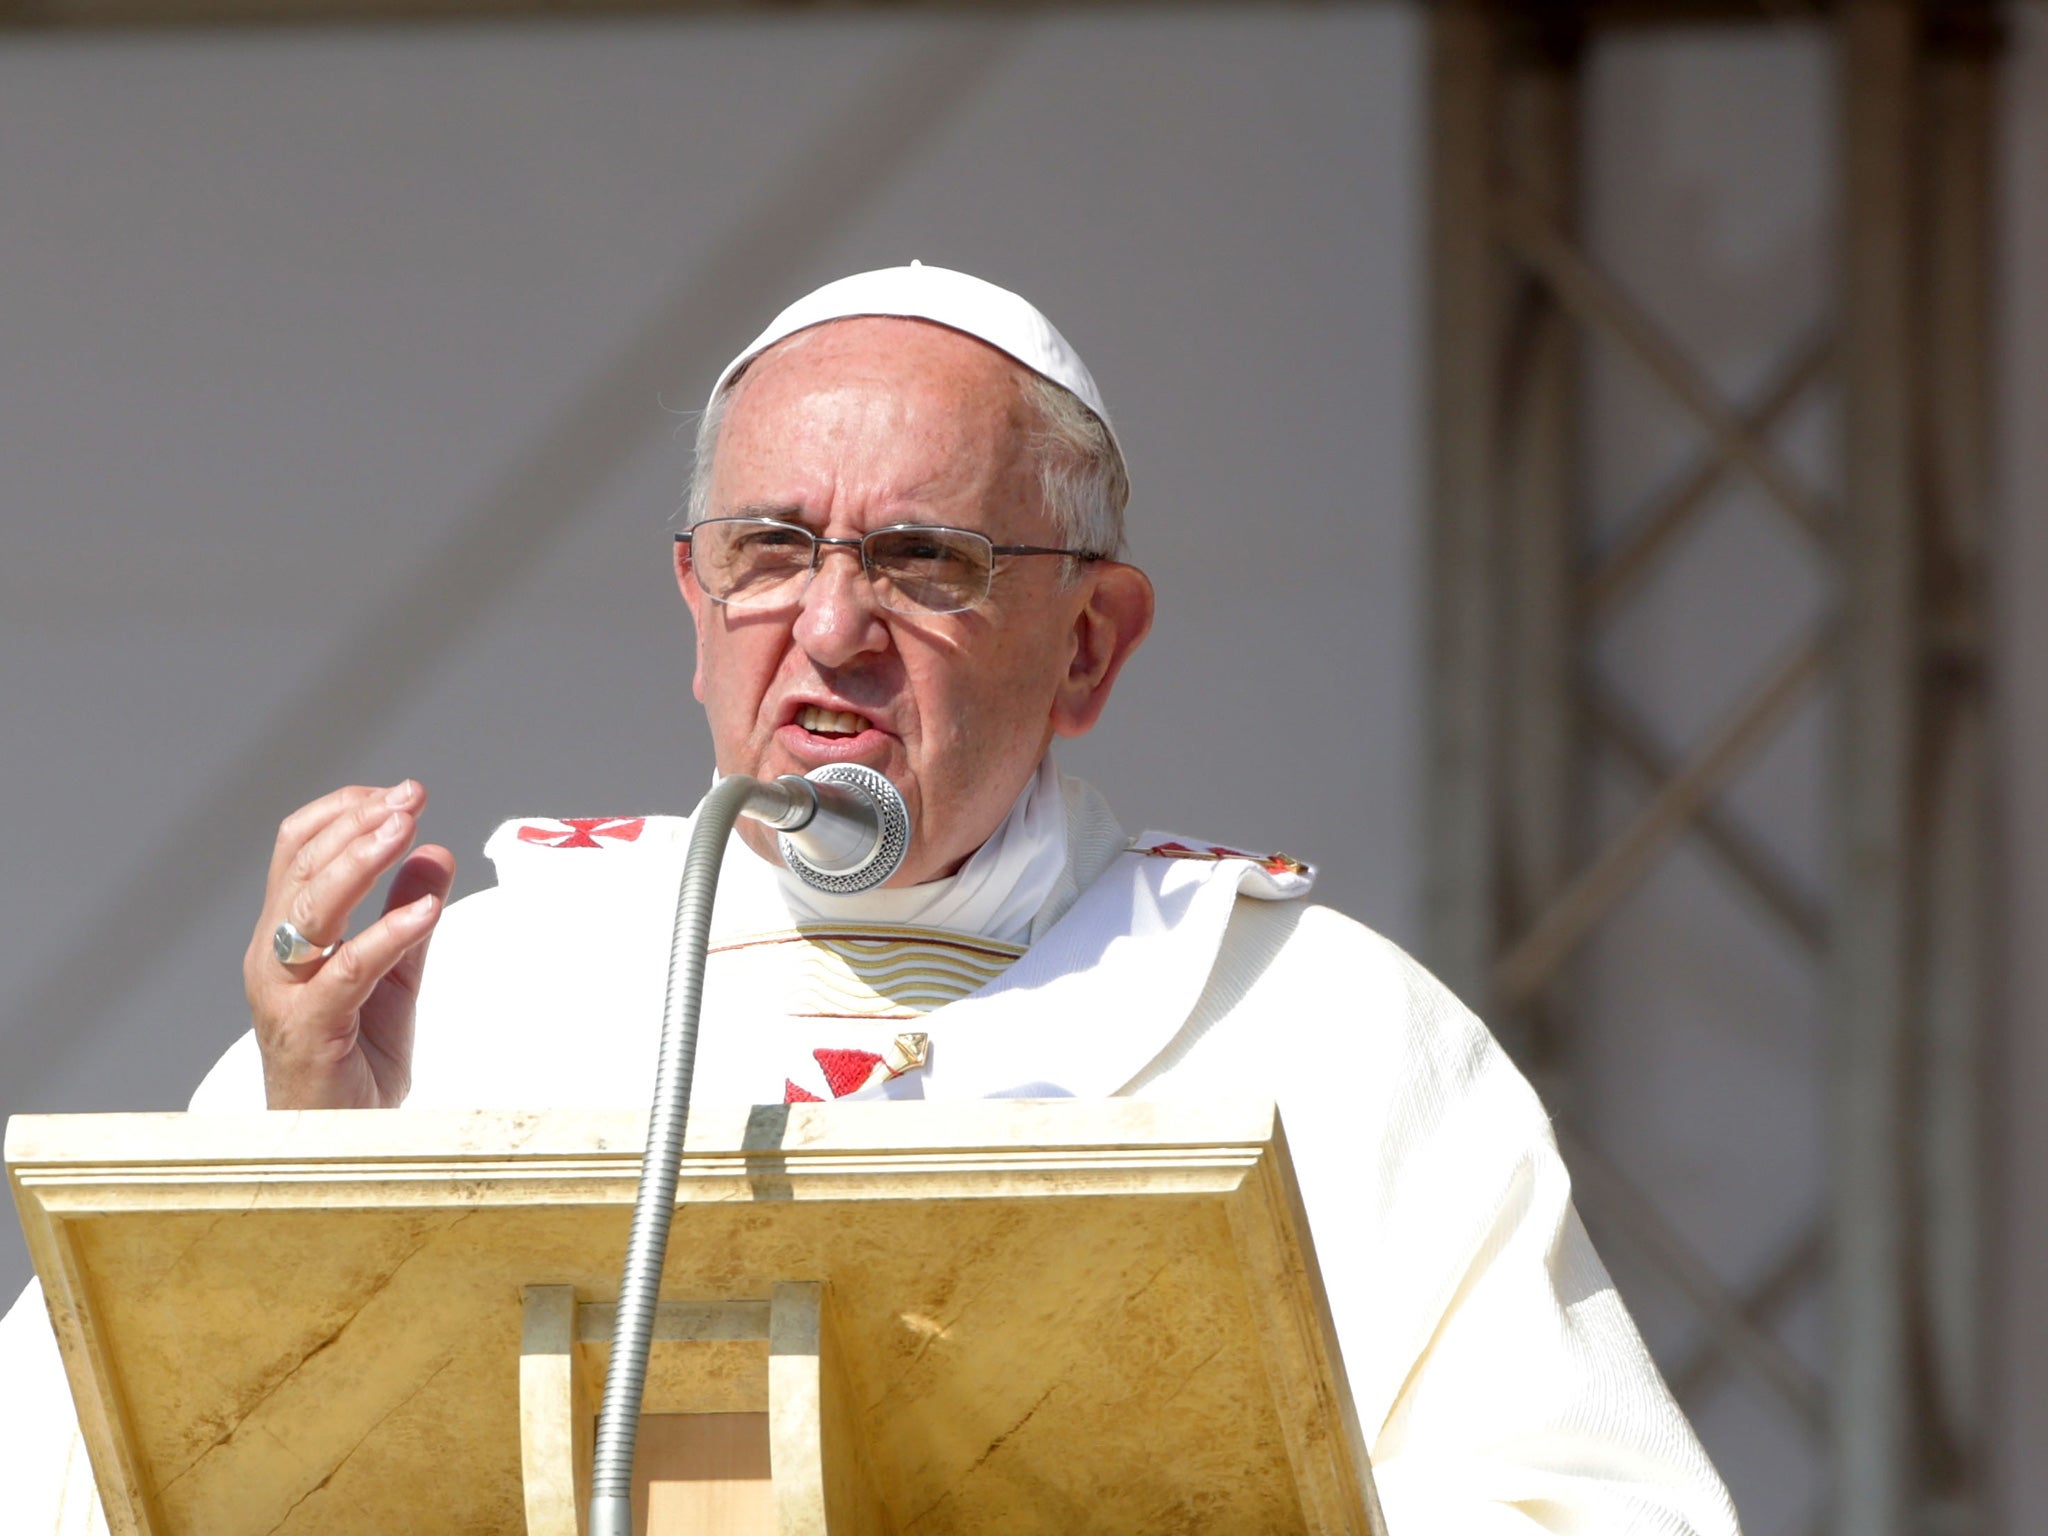 Pope Francis made the comments at Mass in front of thousands of people in a small Italian town.